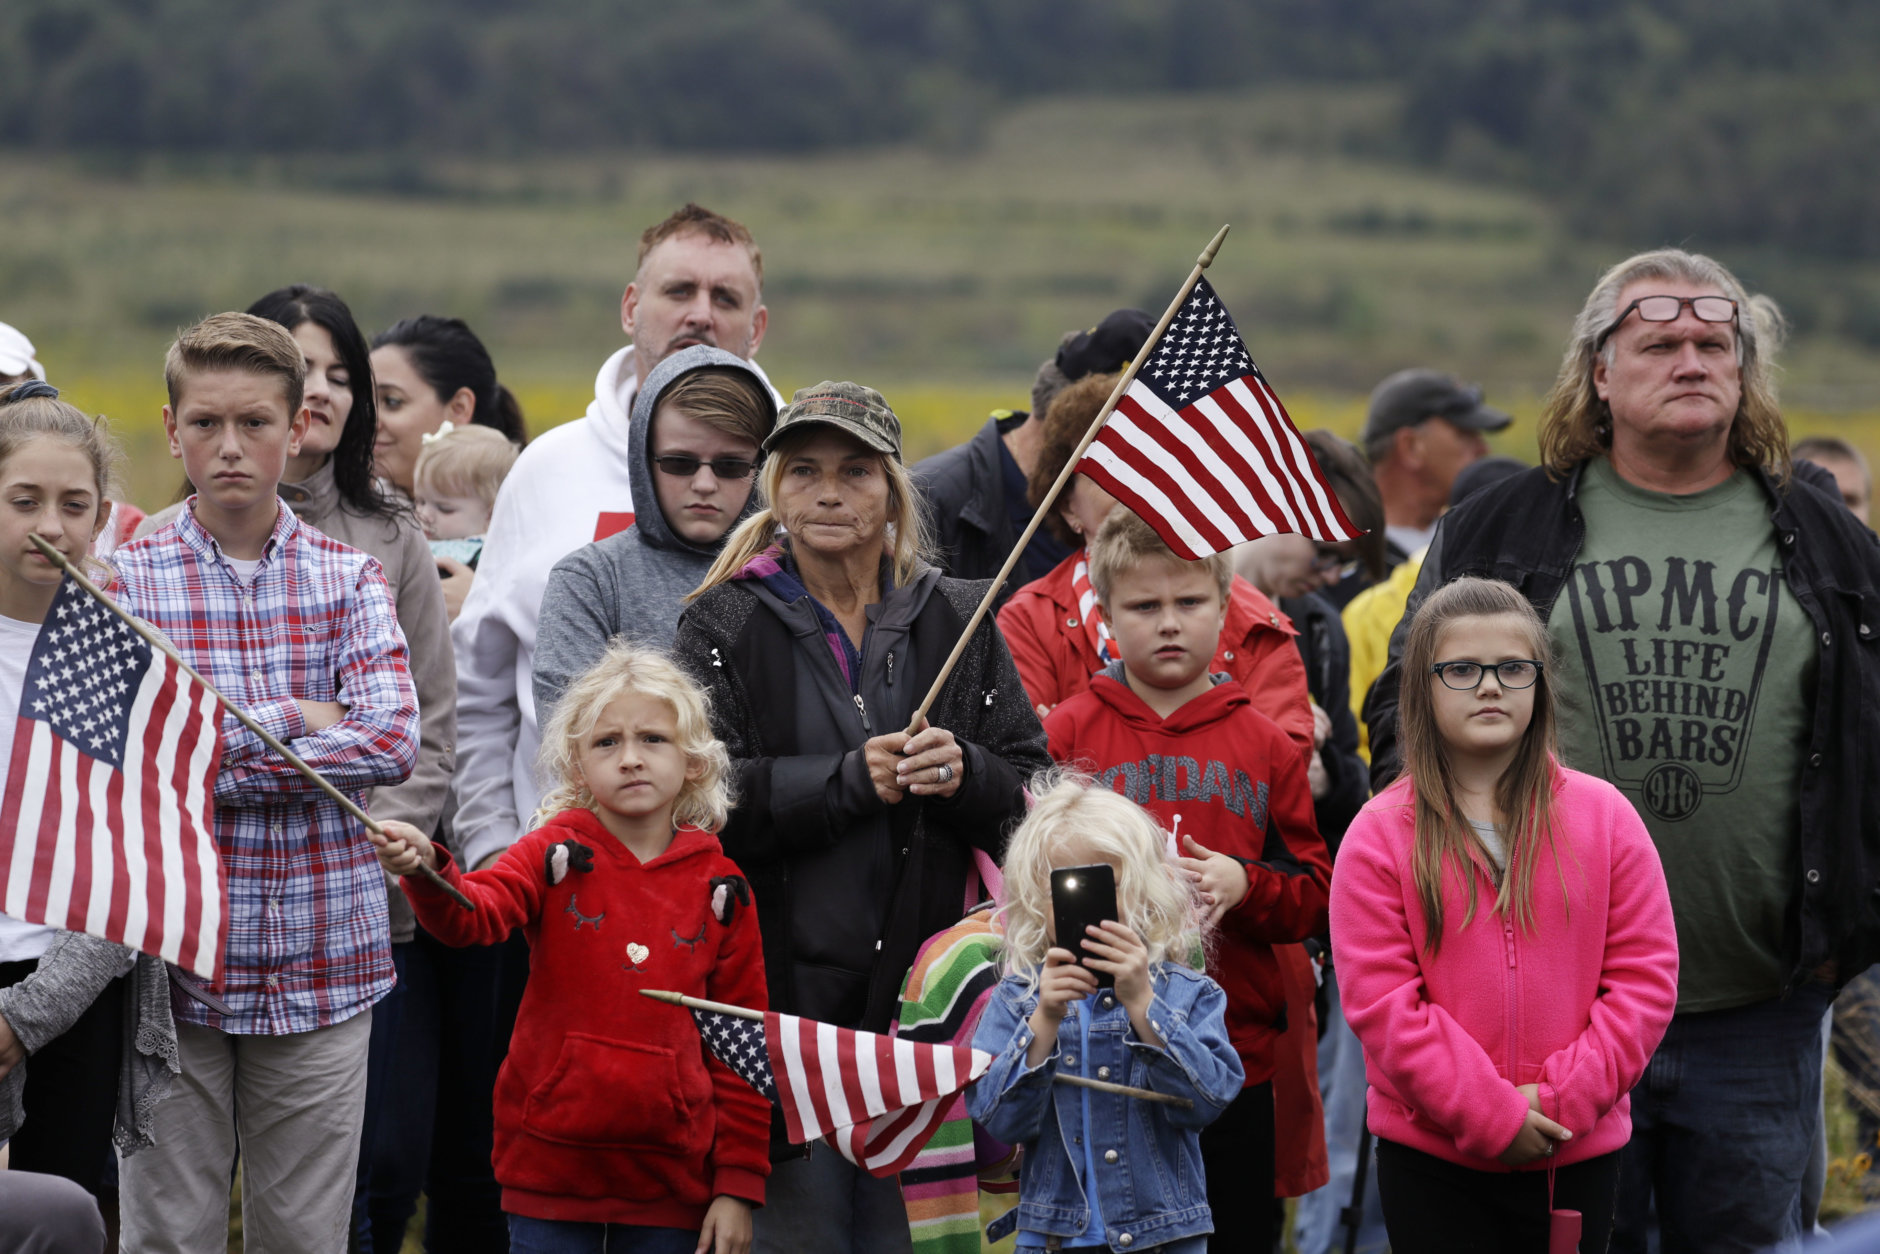 Audience members attend the September 11th Flight 93 Memorial Service, Tuesday, Sept. 11, 2018, in Shanksville, Pa. President Donald Trump is marking 17 years since the worst terrorist attack on U.S. soil by visiting the Pennsylvania field that became a Sept. 11 memorial.  (AP Photo/Evan Vucci)